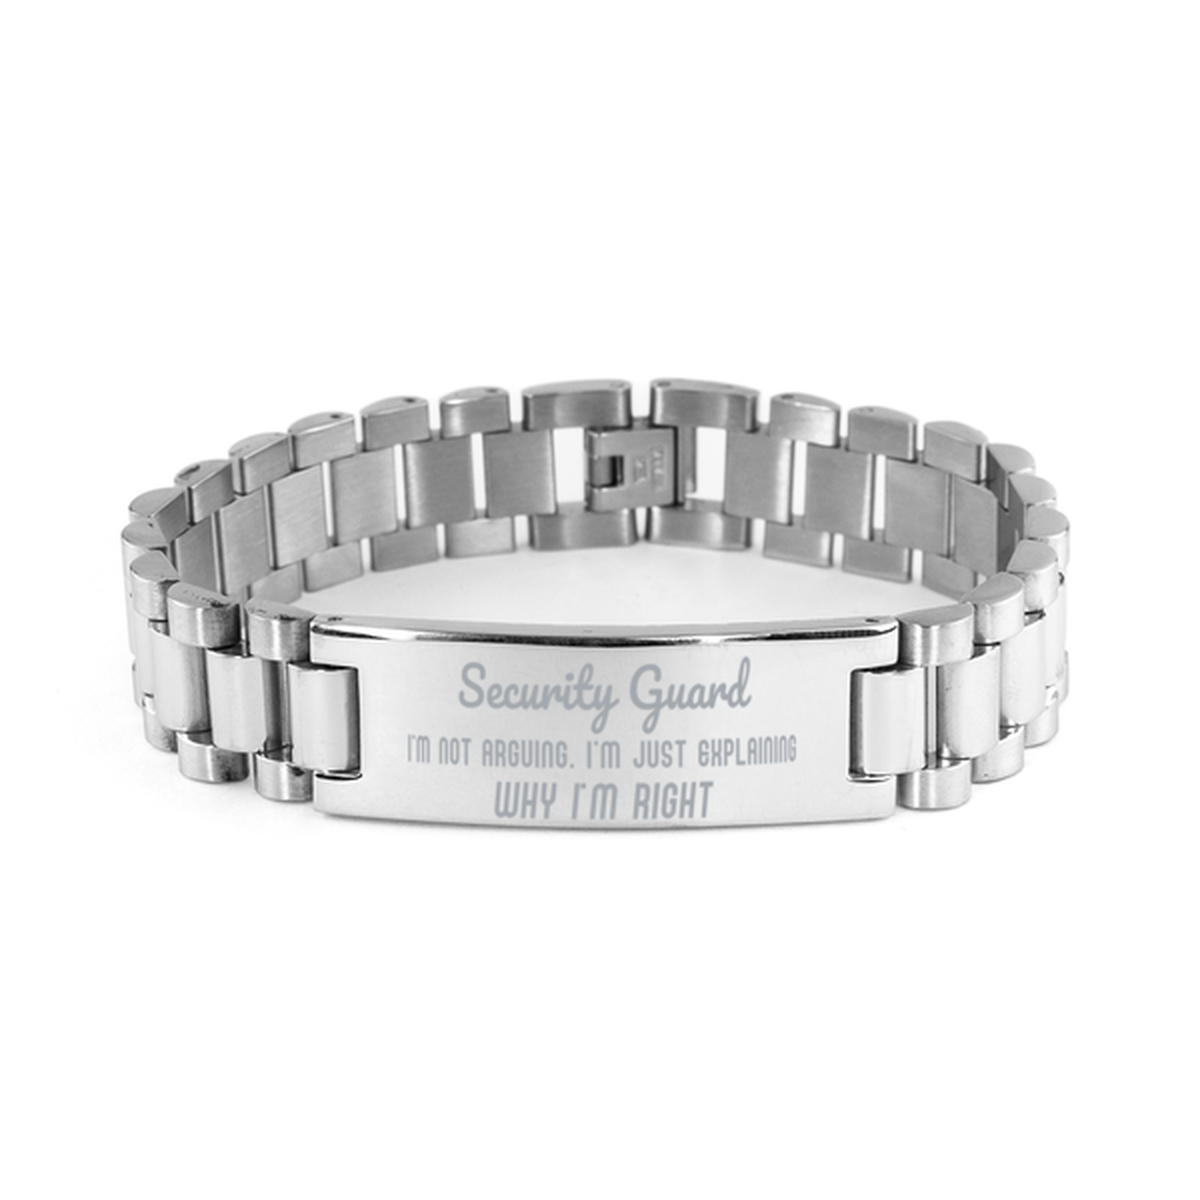 Security Guard I'm not Arguing. I'm Just Explaining Why I'm RIGHT Ladder Stainless Steel Bracelet, Graduation Birthday Christmas Security Guard Gifts For Security Guard Funny Saying Quote Present for Men Women Coworker